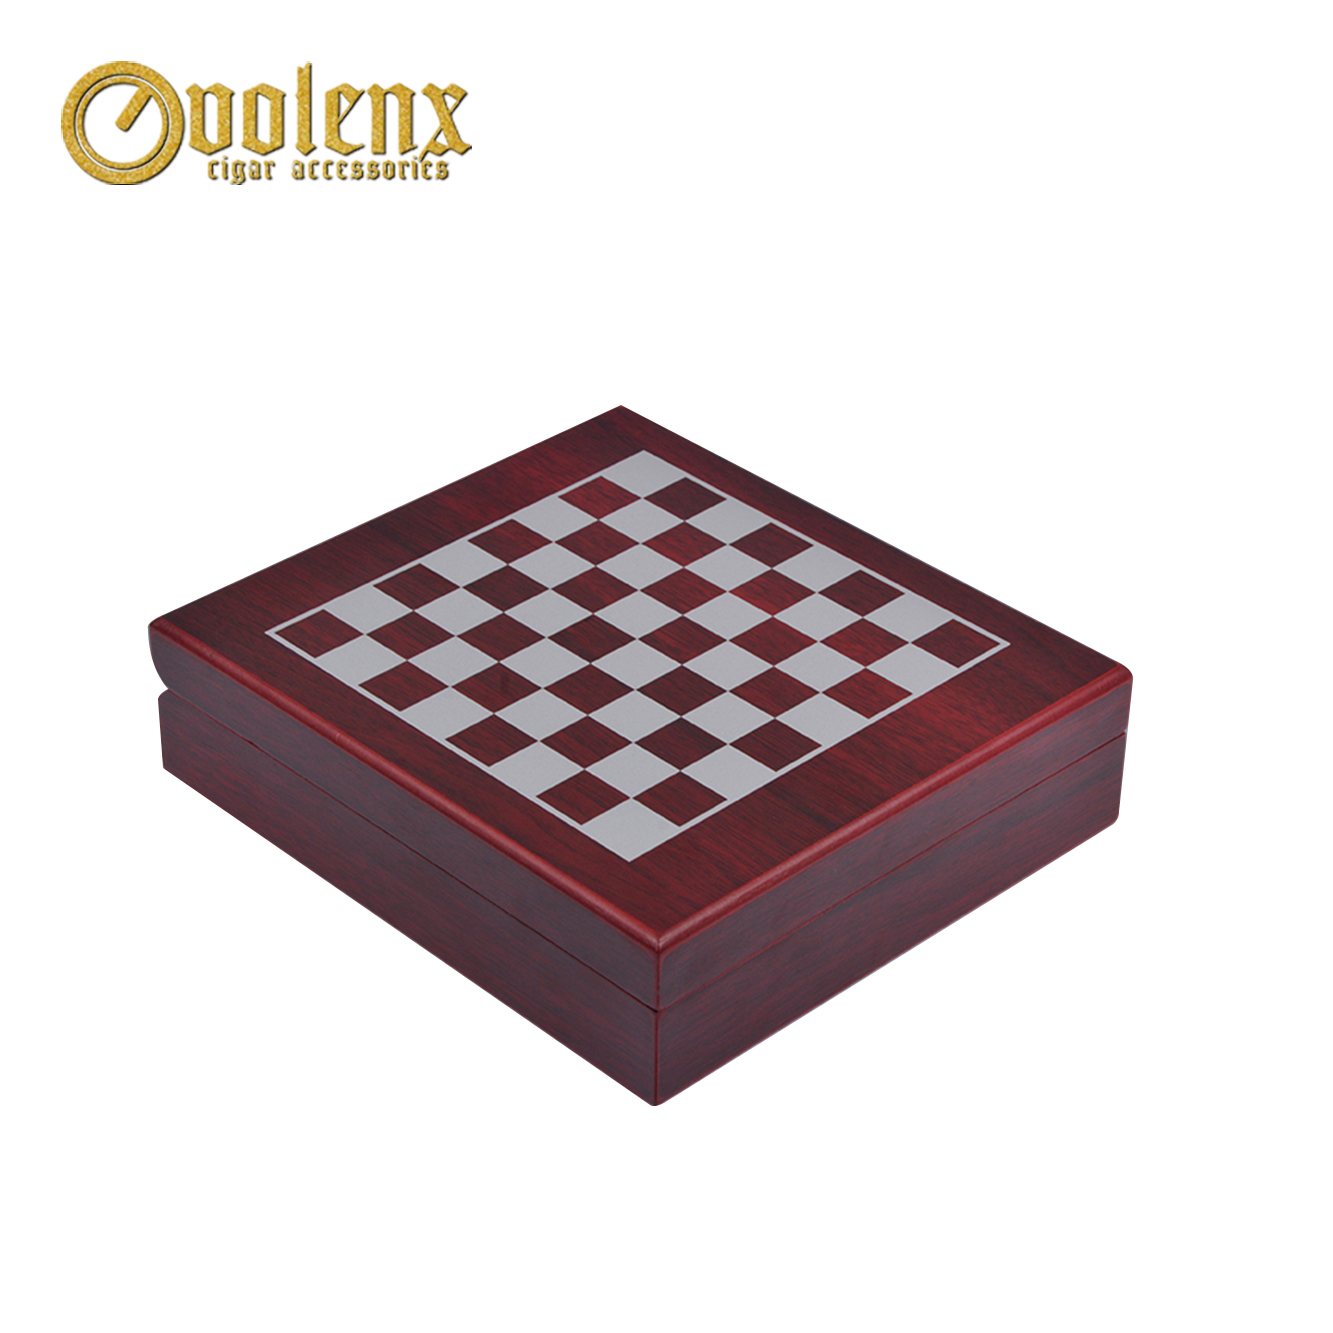 Hot-selling New Design Chinese chess set wooden wine box set 11